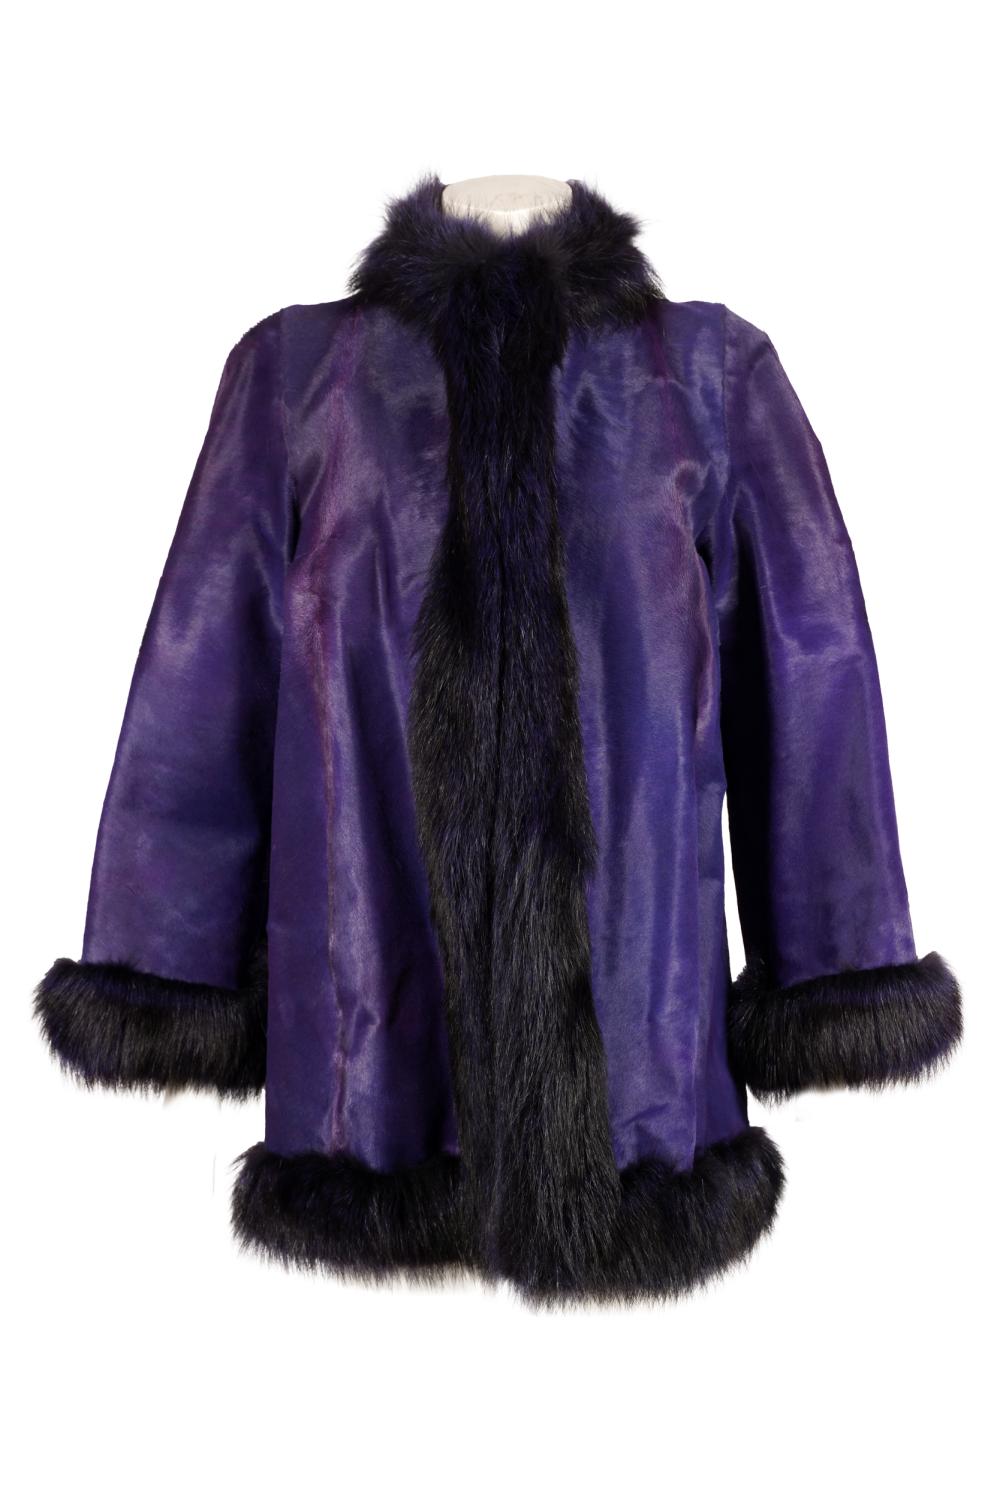 RENEE LONDON DYED FUR JACKETwith 3320a4